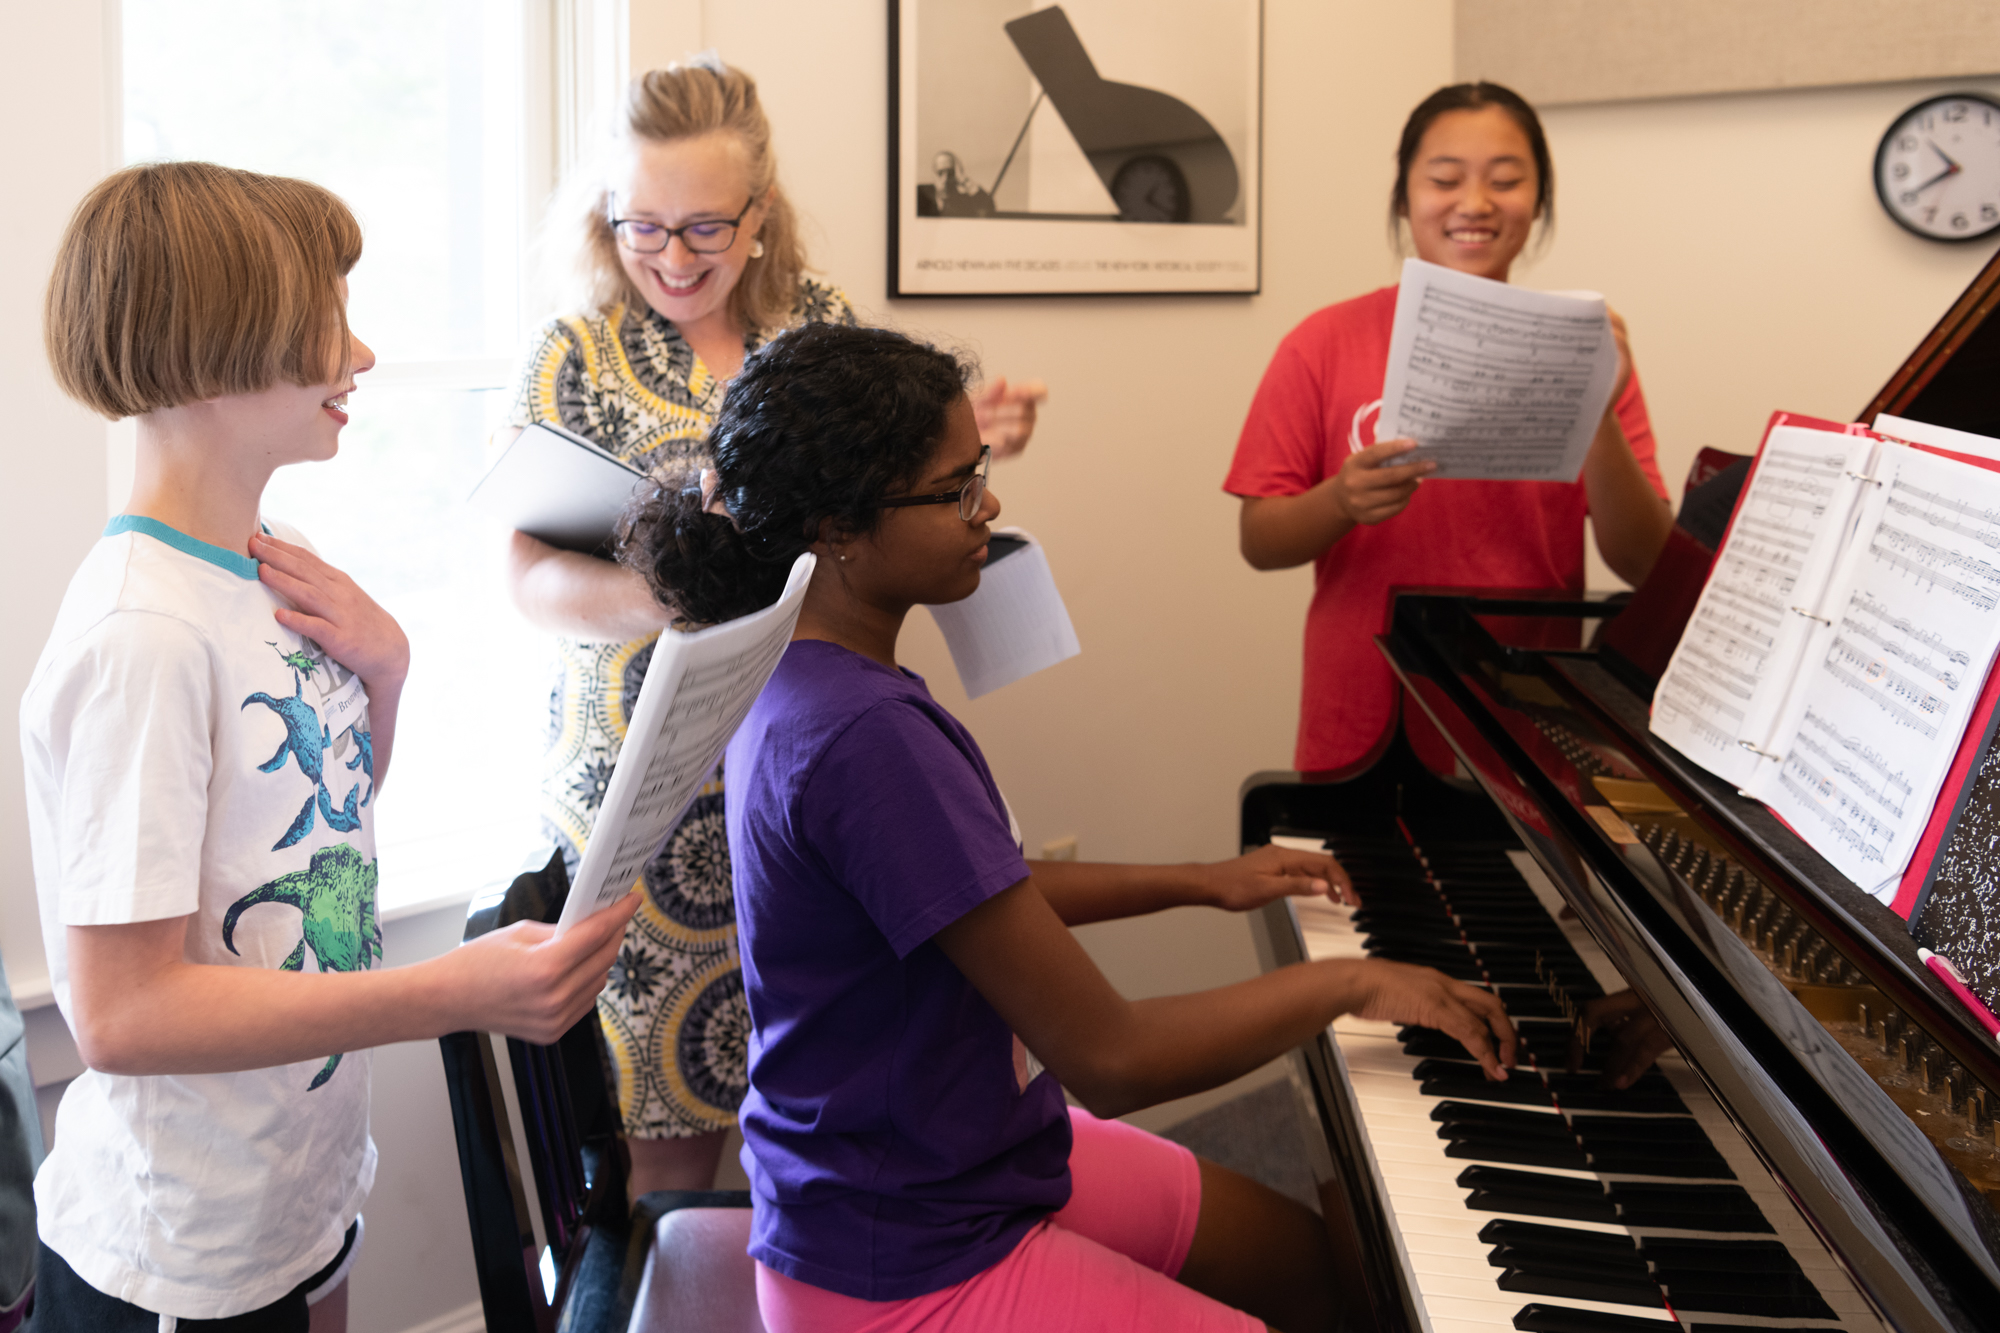 Voice coach with students and piano